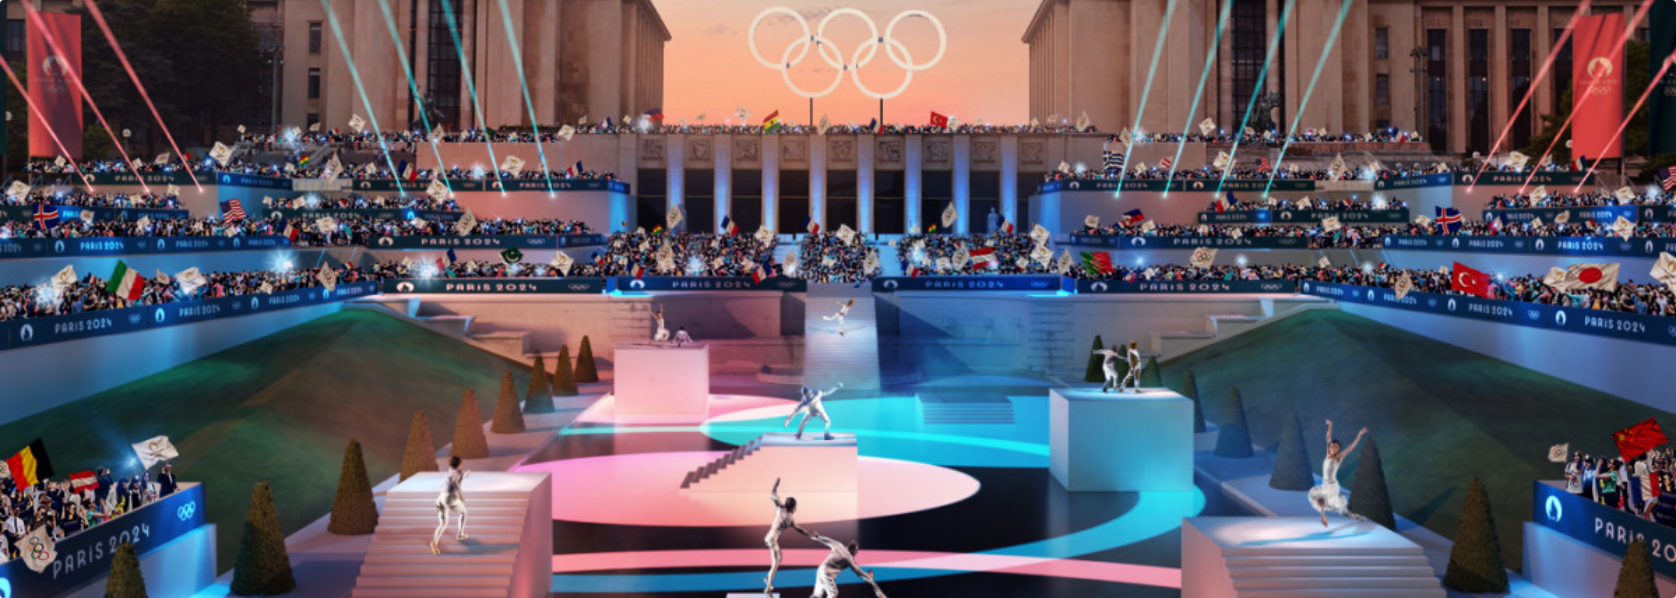 Do upcoming Olympic Games draw a number of applicants greater than average?